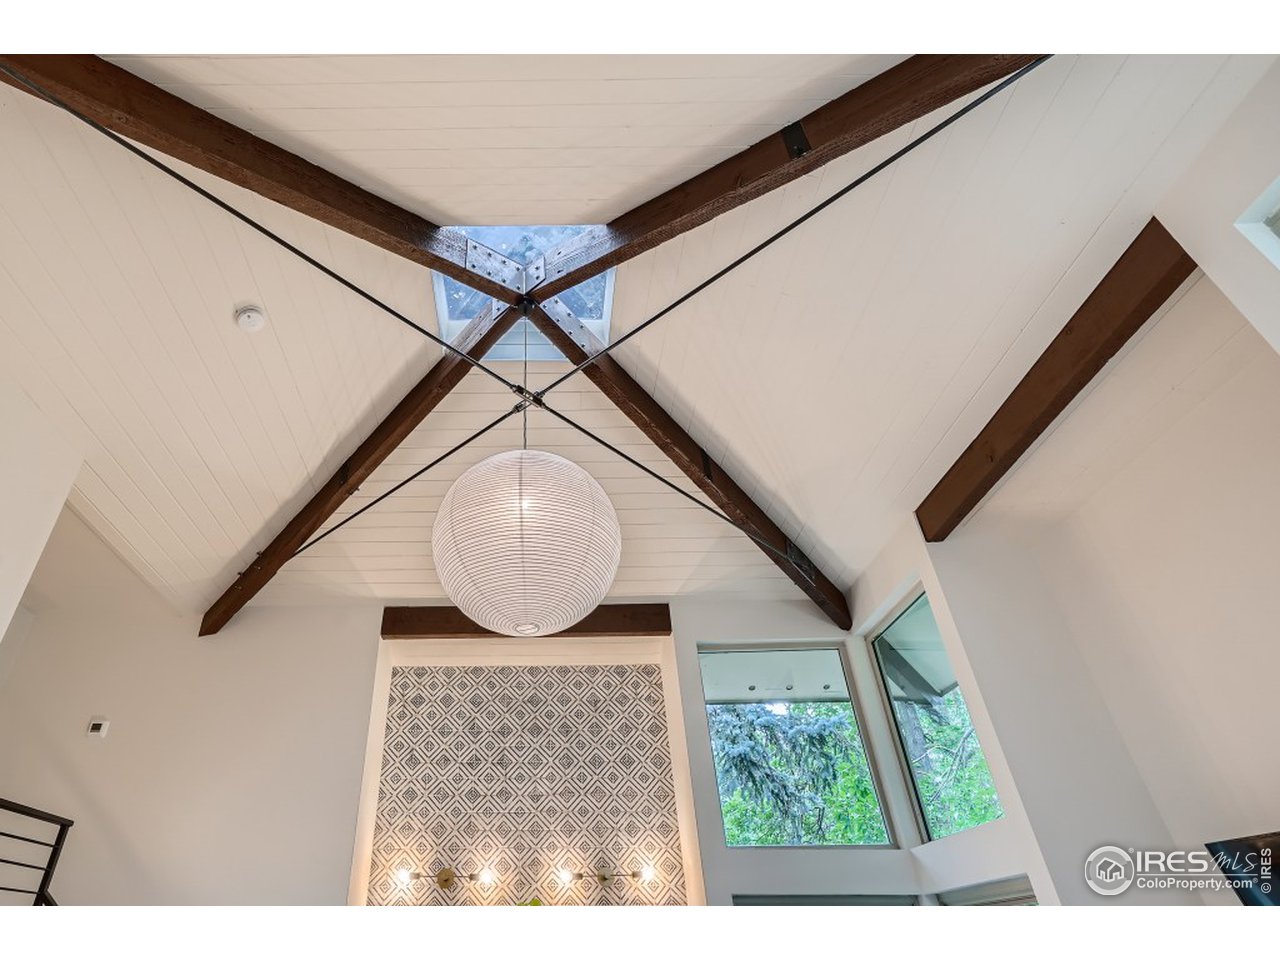 Lower level family room has artistic ceiling features